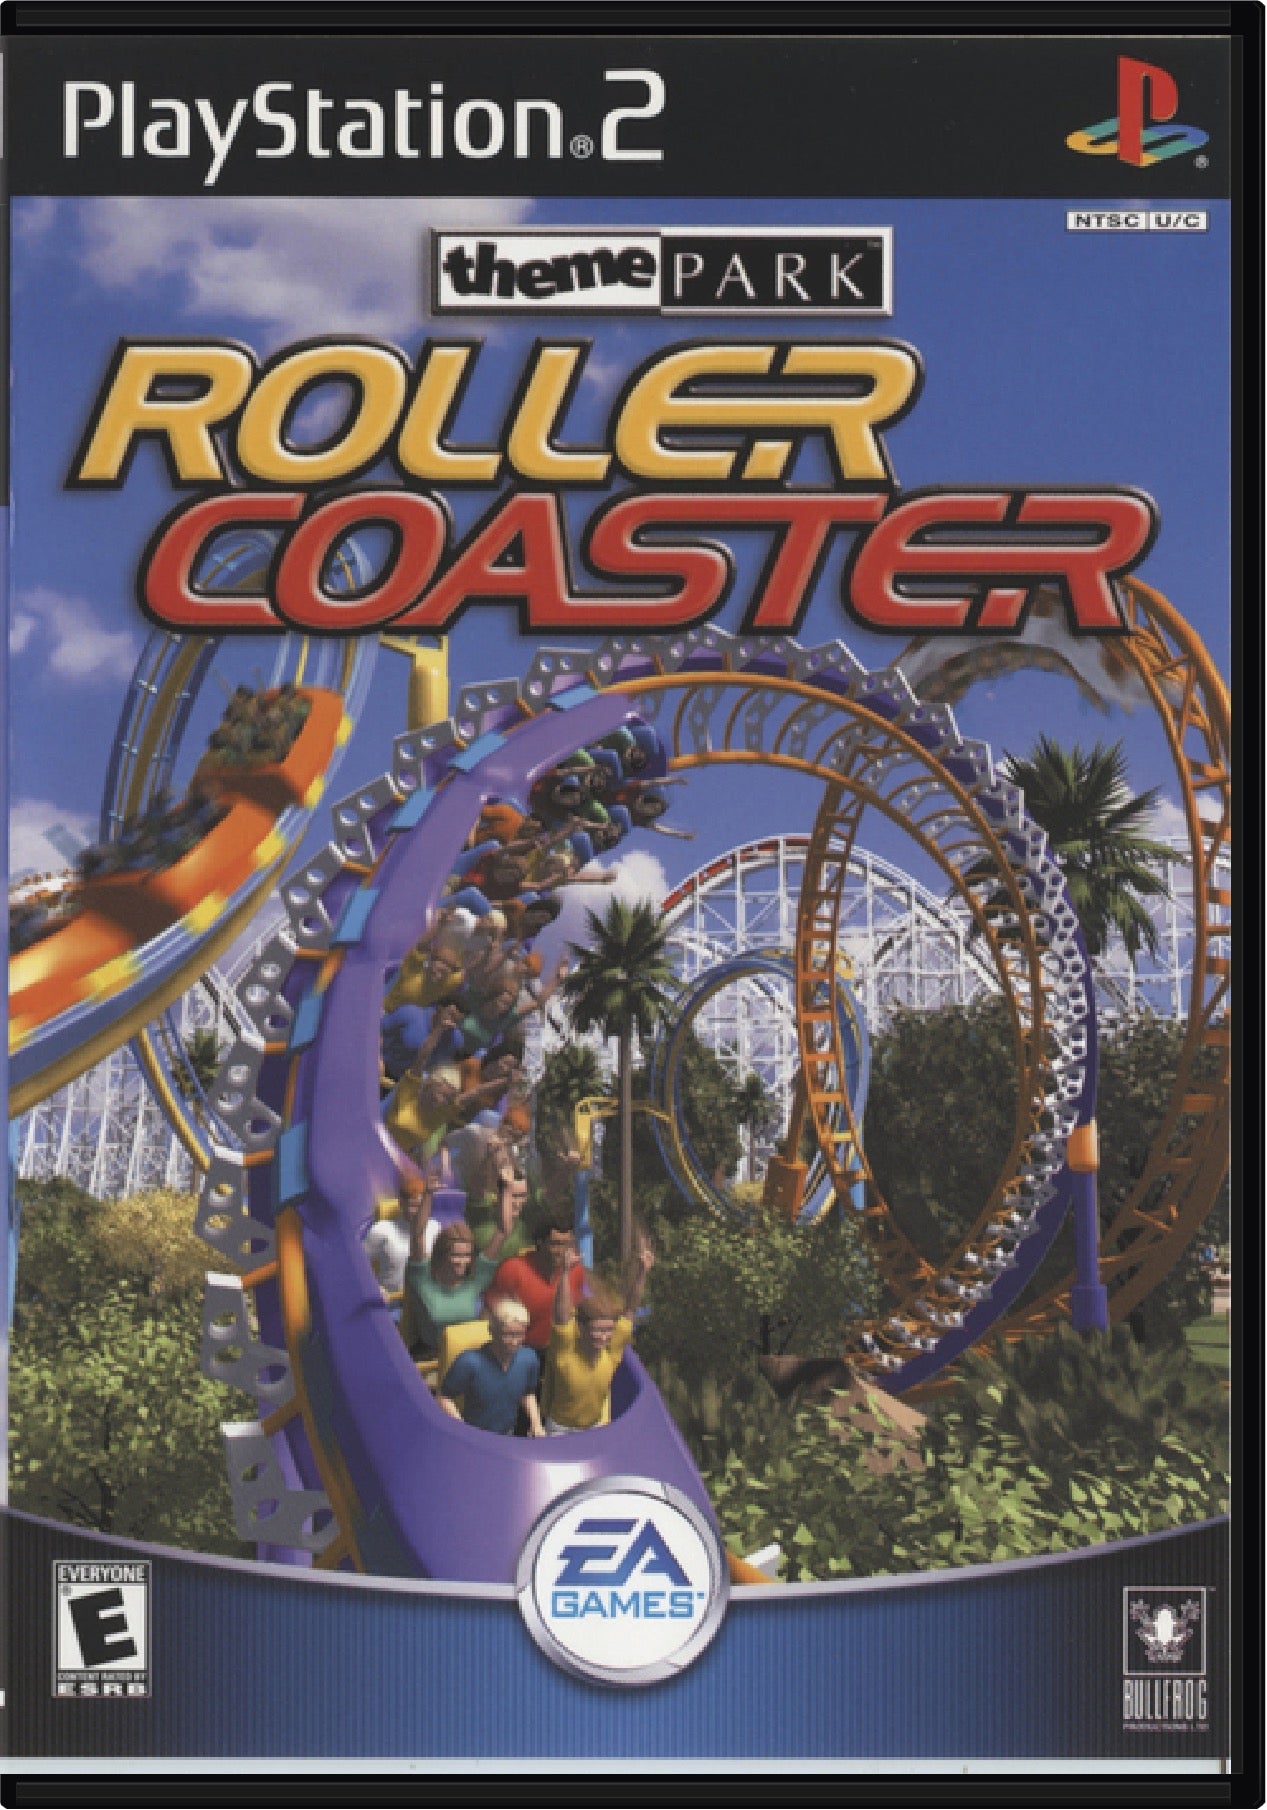 Theme Park Roller Coaster Cover Art and Product Photo